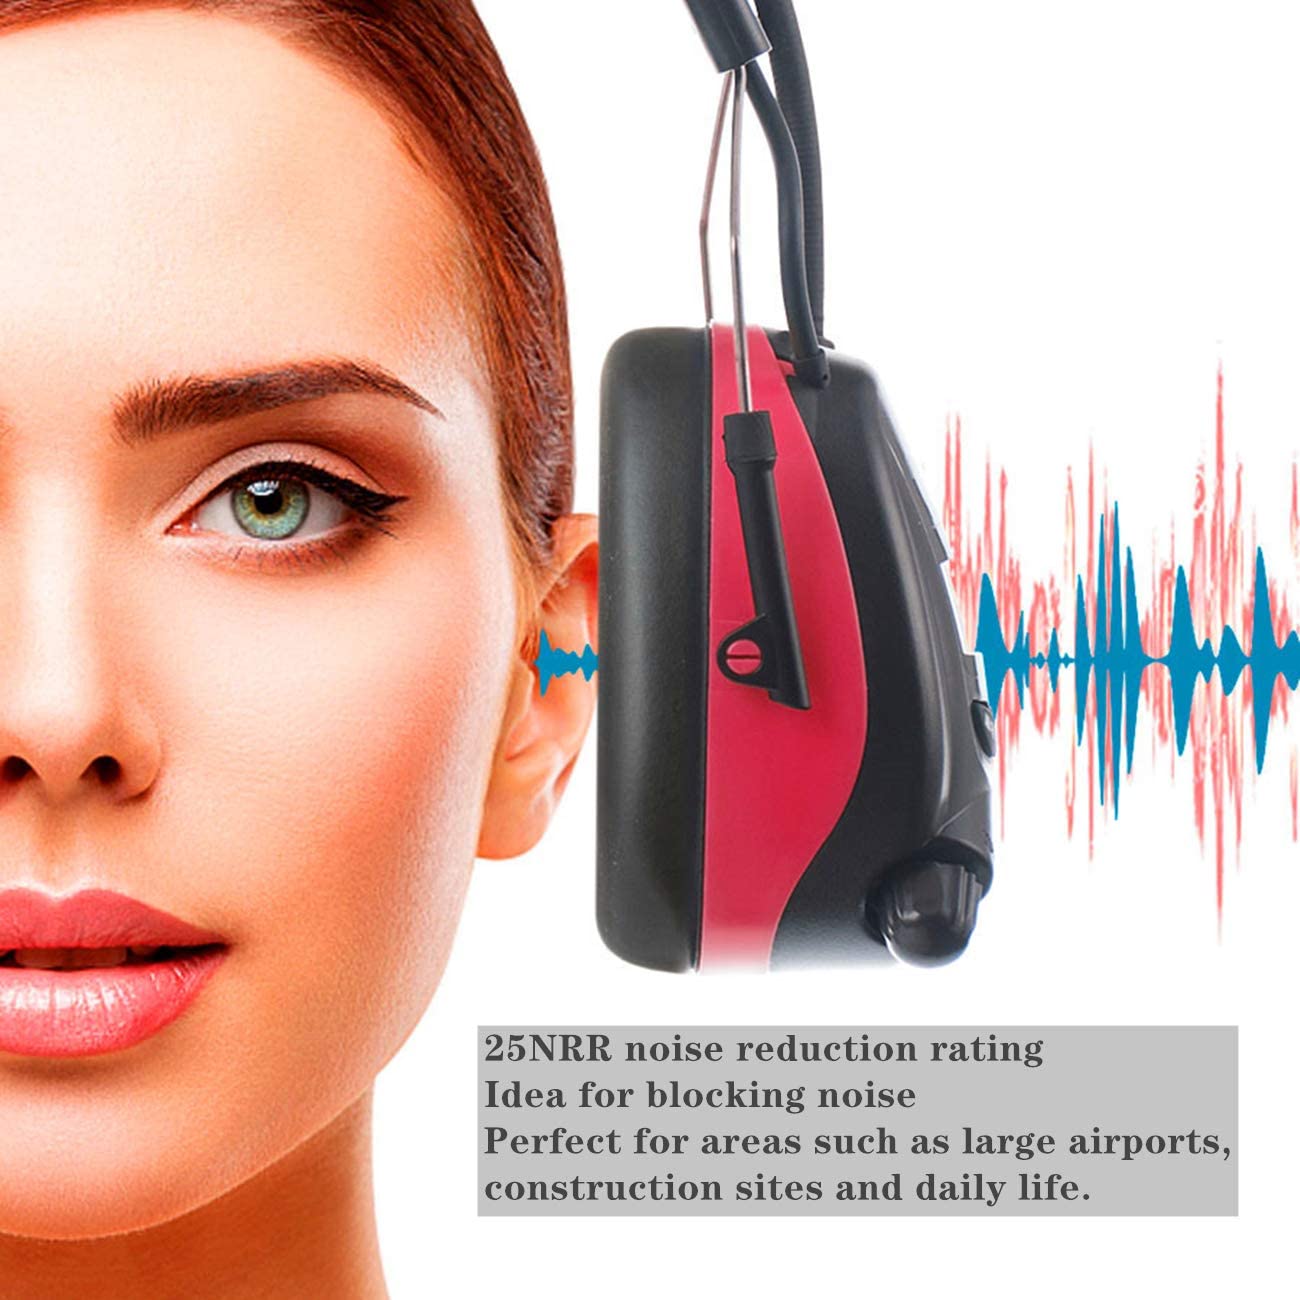 SKYSONIC AM FM Hearing Protector with Bluetooth Technology, Noise Reduction  Safety Earmuffs 25dB NRR, Rechargrable Ear protection for Mowing,  Snowblowing, Construction, Work Shops(Red)